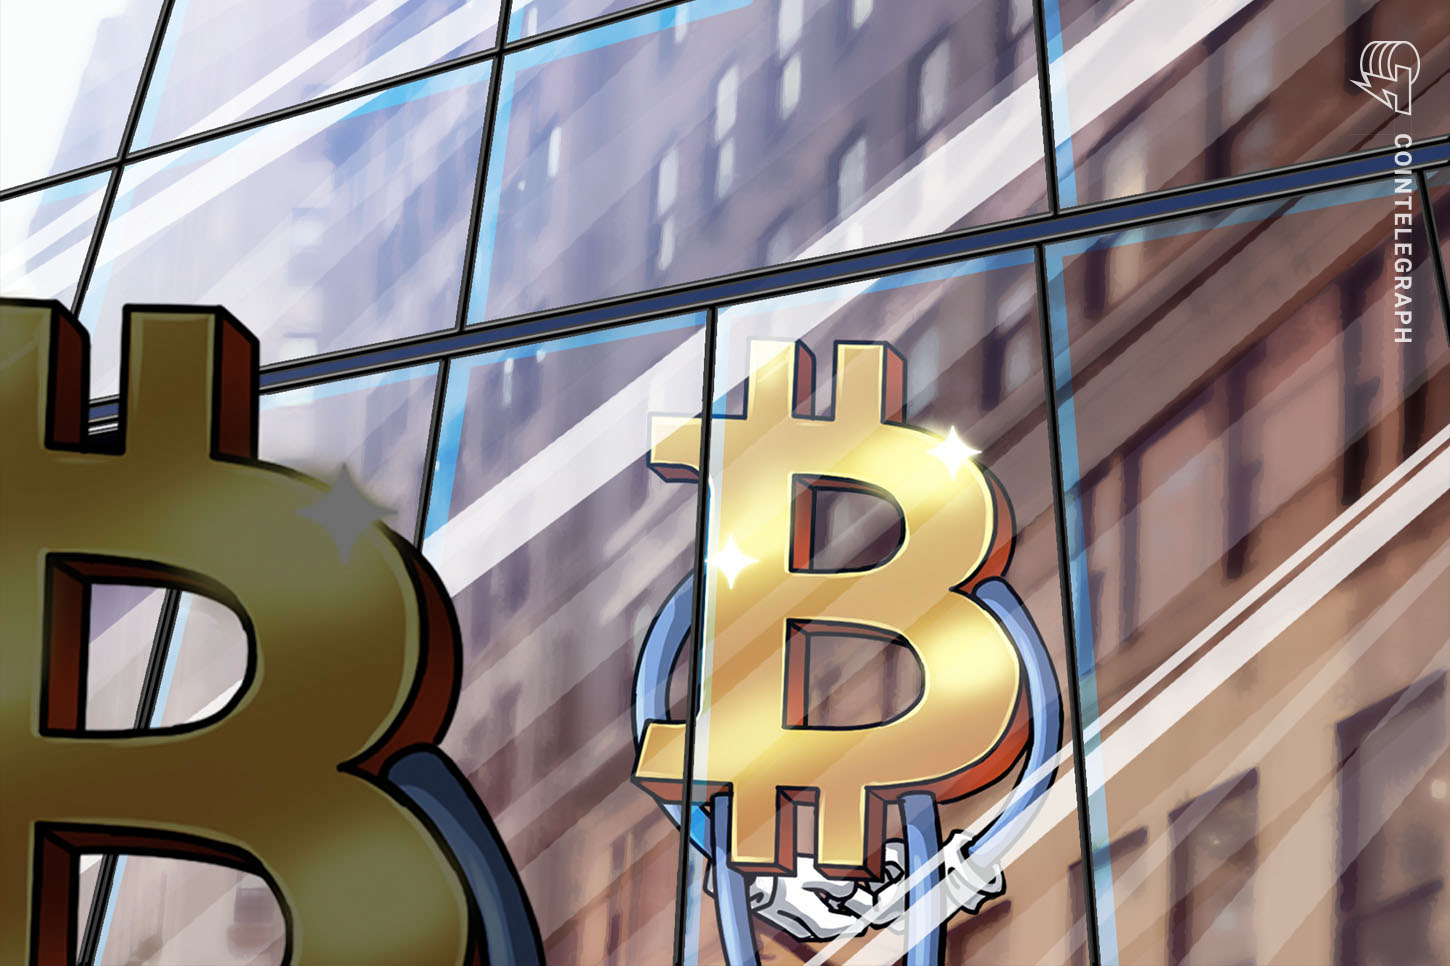 Bitcoin’s popularity nonetheless a deterrent for establishments, Draper fund analyst says